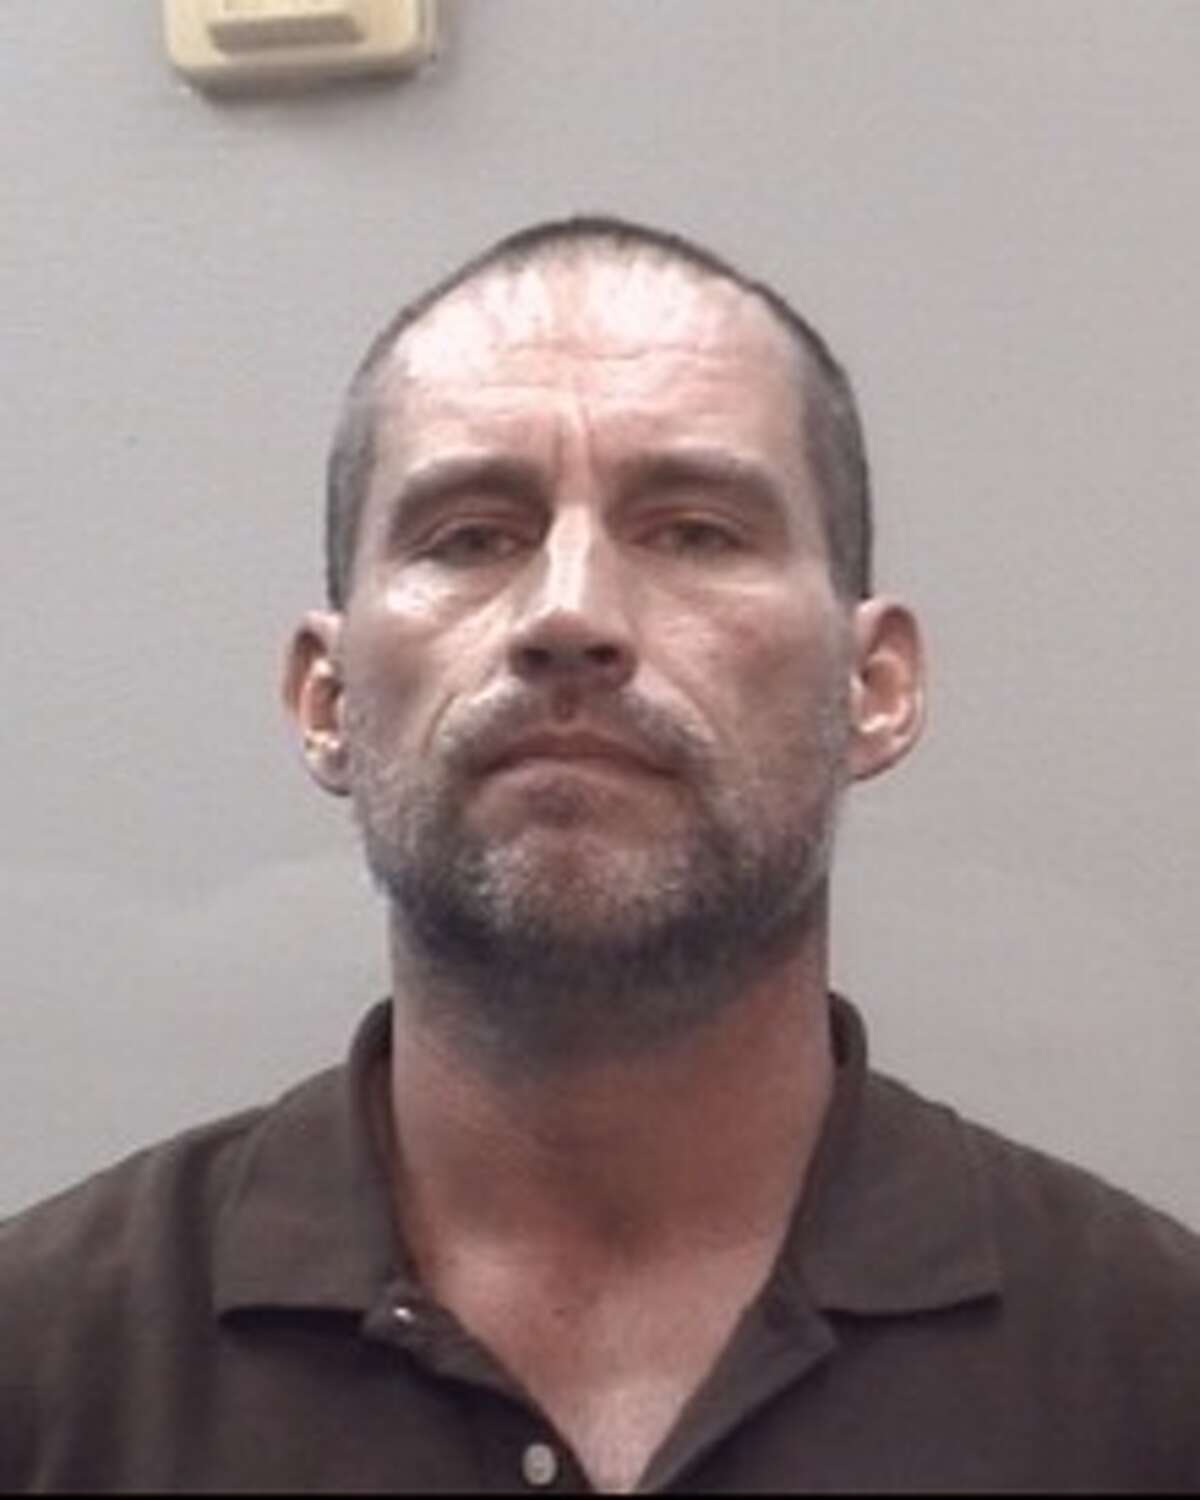 Stephen McGee, 44, is accused of stalking an ex-girlfriend and posting nude photos of the victim on a public Facebook page. The alleged stalking occurred over a period of several months from December 2017 to March 2018.